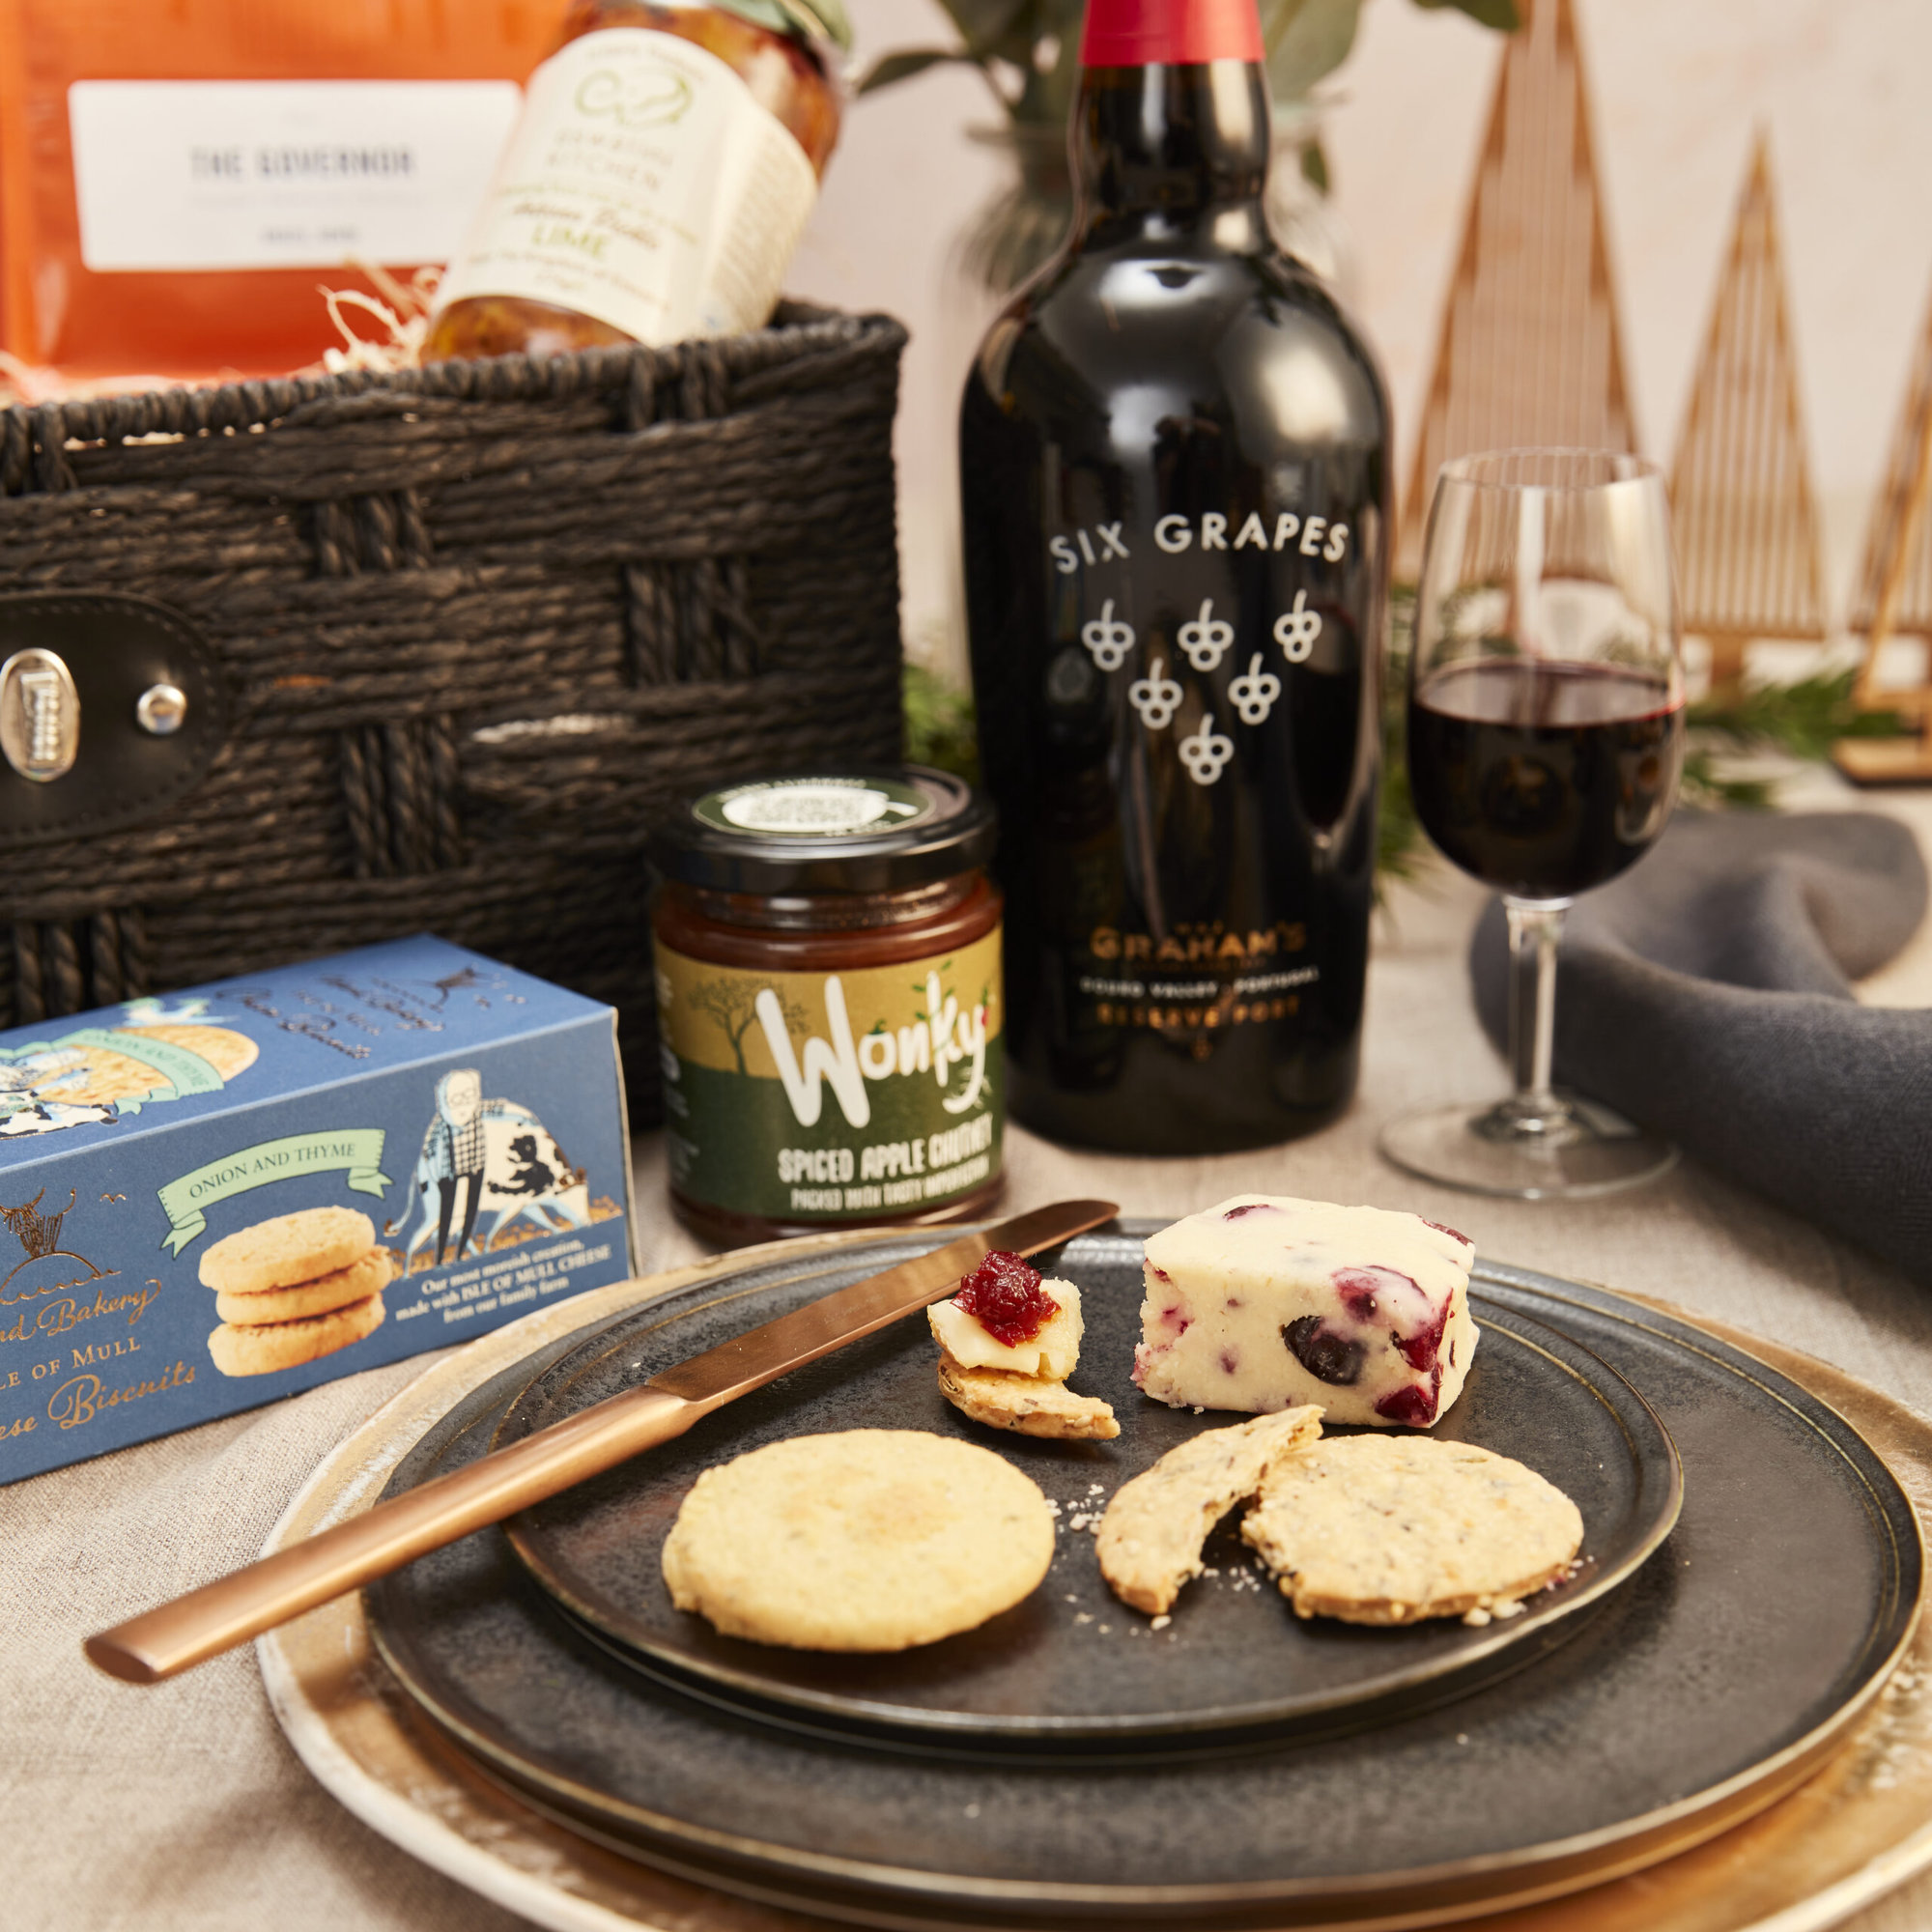 The Port and Pairings Hamper